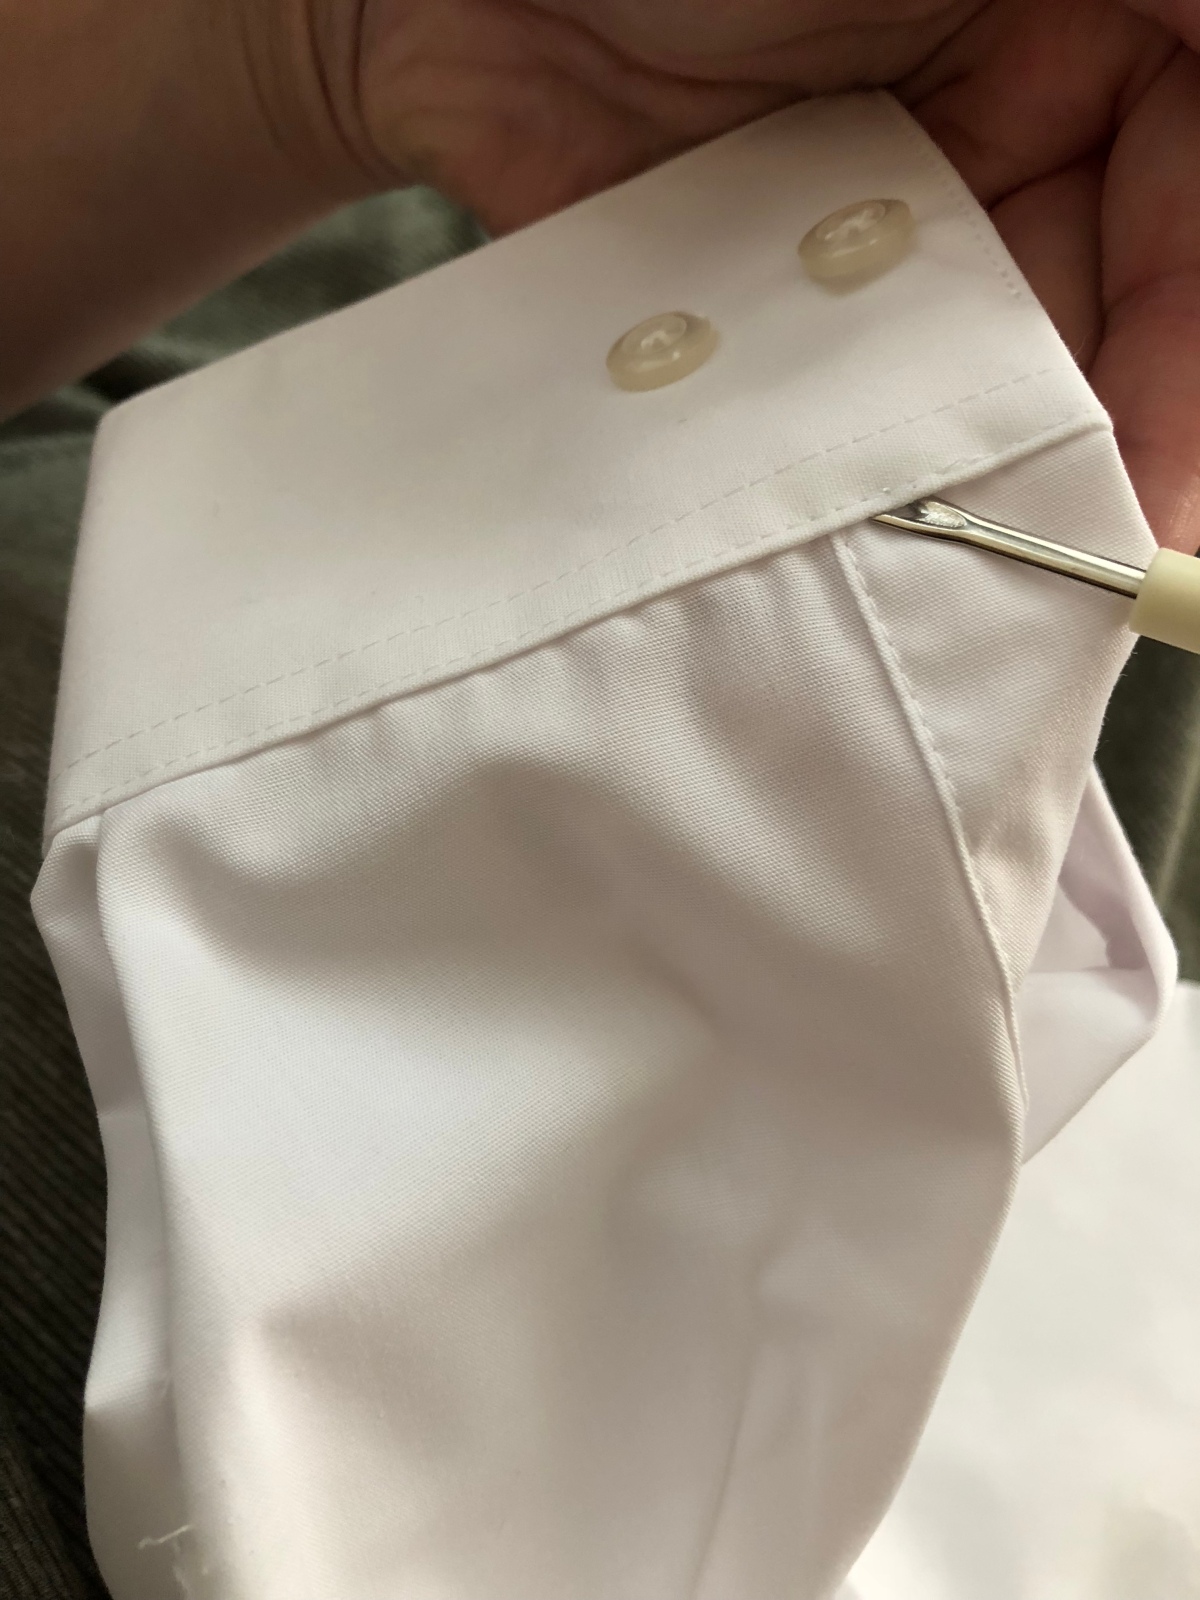 The Making of a Party Shirt (Part 1)